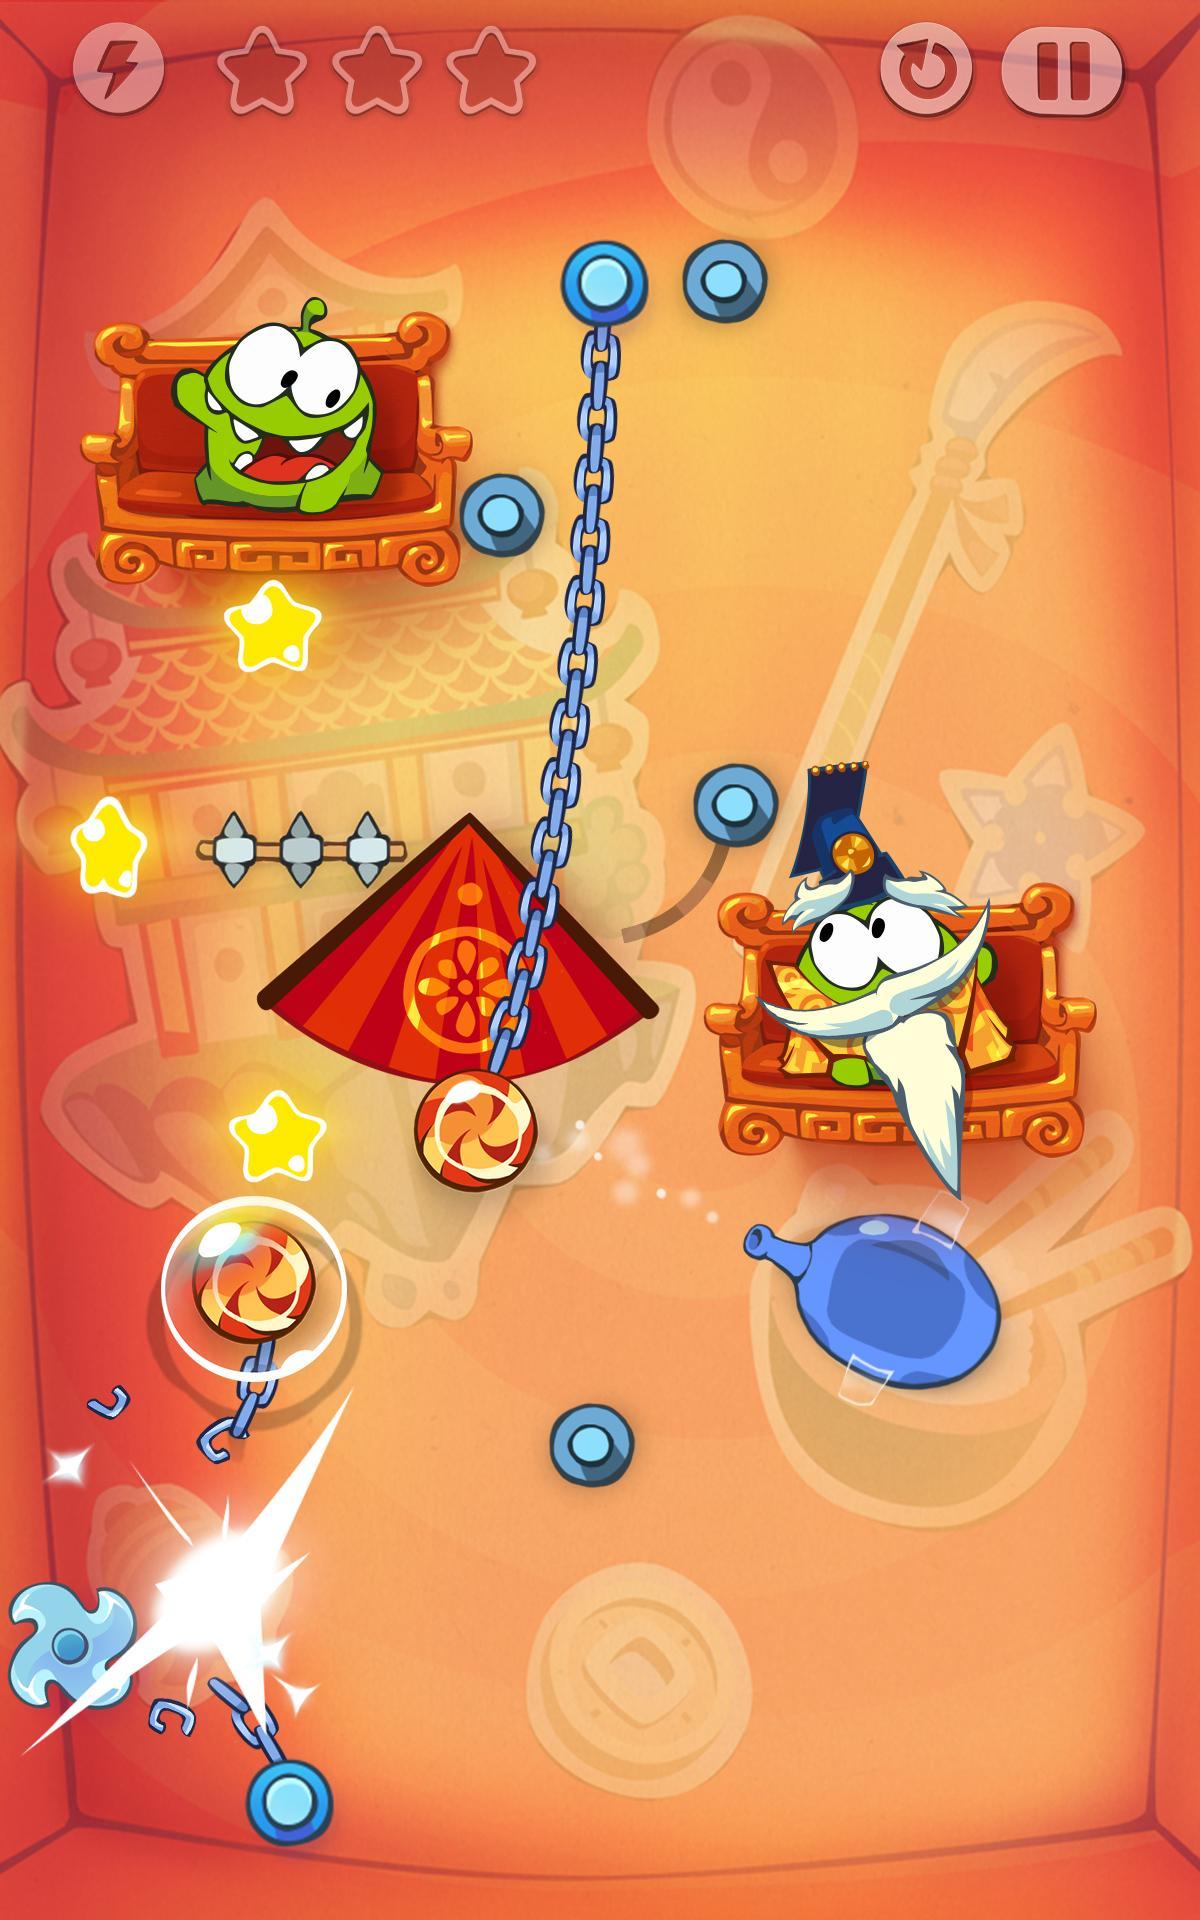 cut the rope time travel 2 14